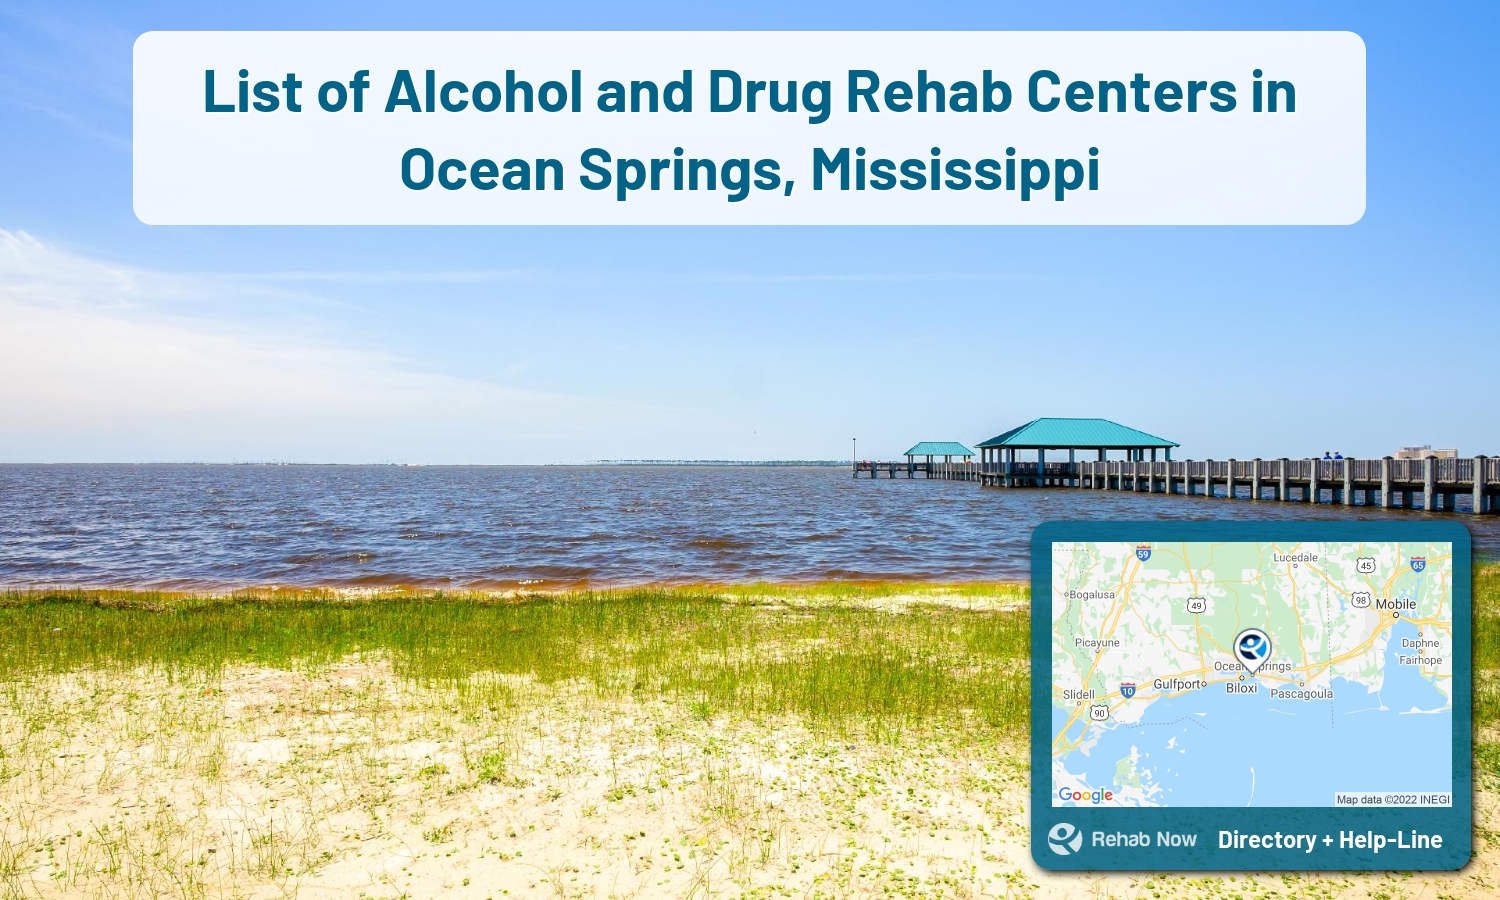 View options, availability, treatment methods, and more, for drug rehab and alcohol treatment in Ocean Springs, Mississippi